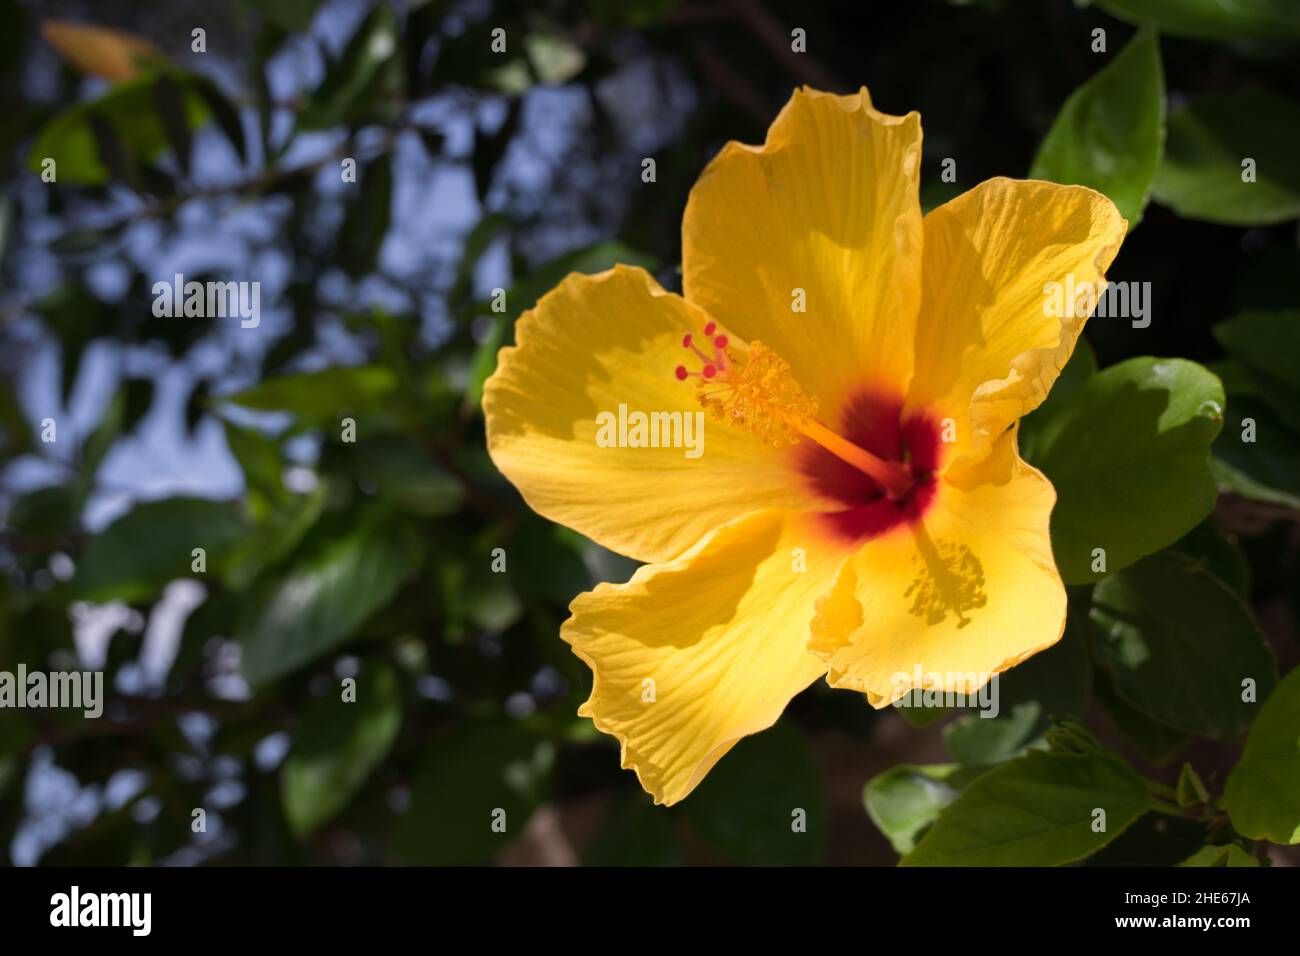 Closeup of a bright yellow petal flower hibiscus syriacus Stock Photo